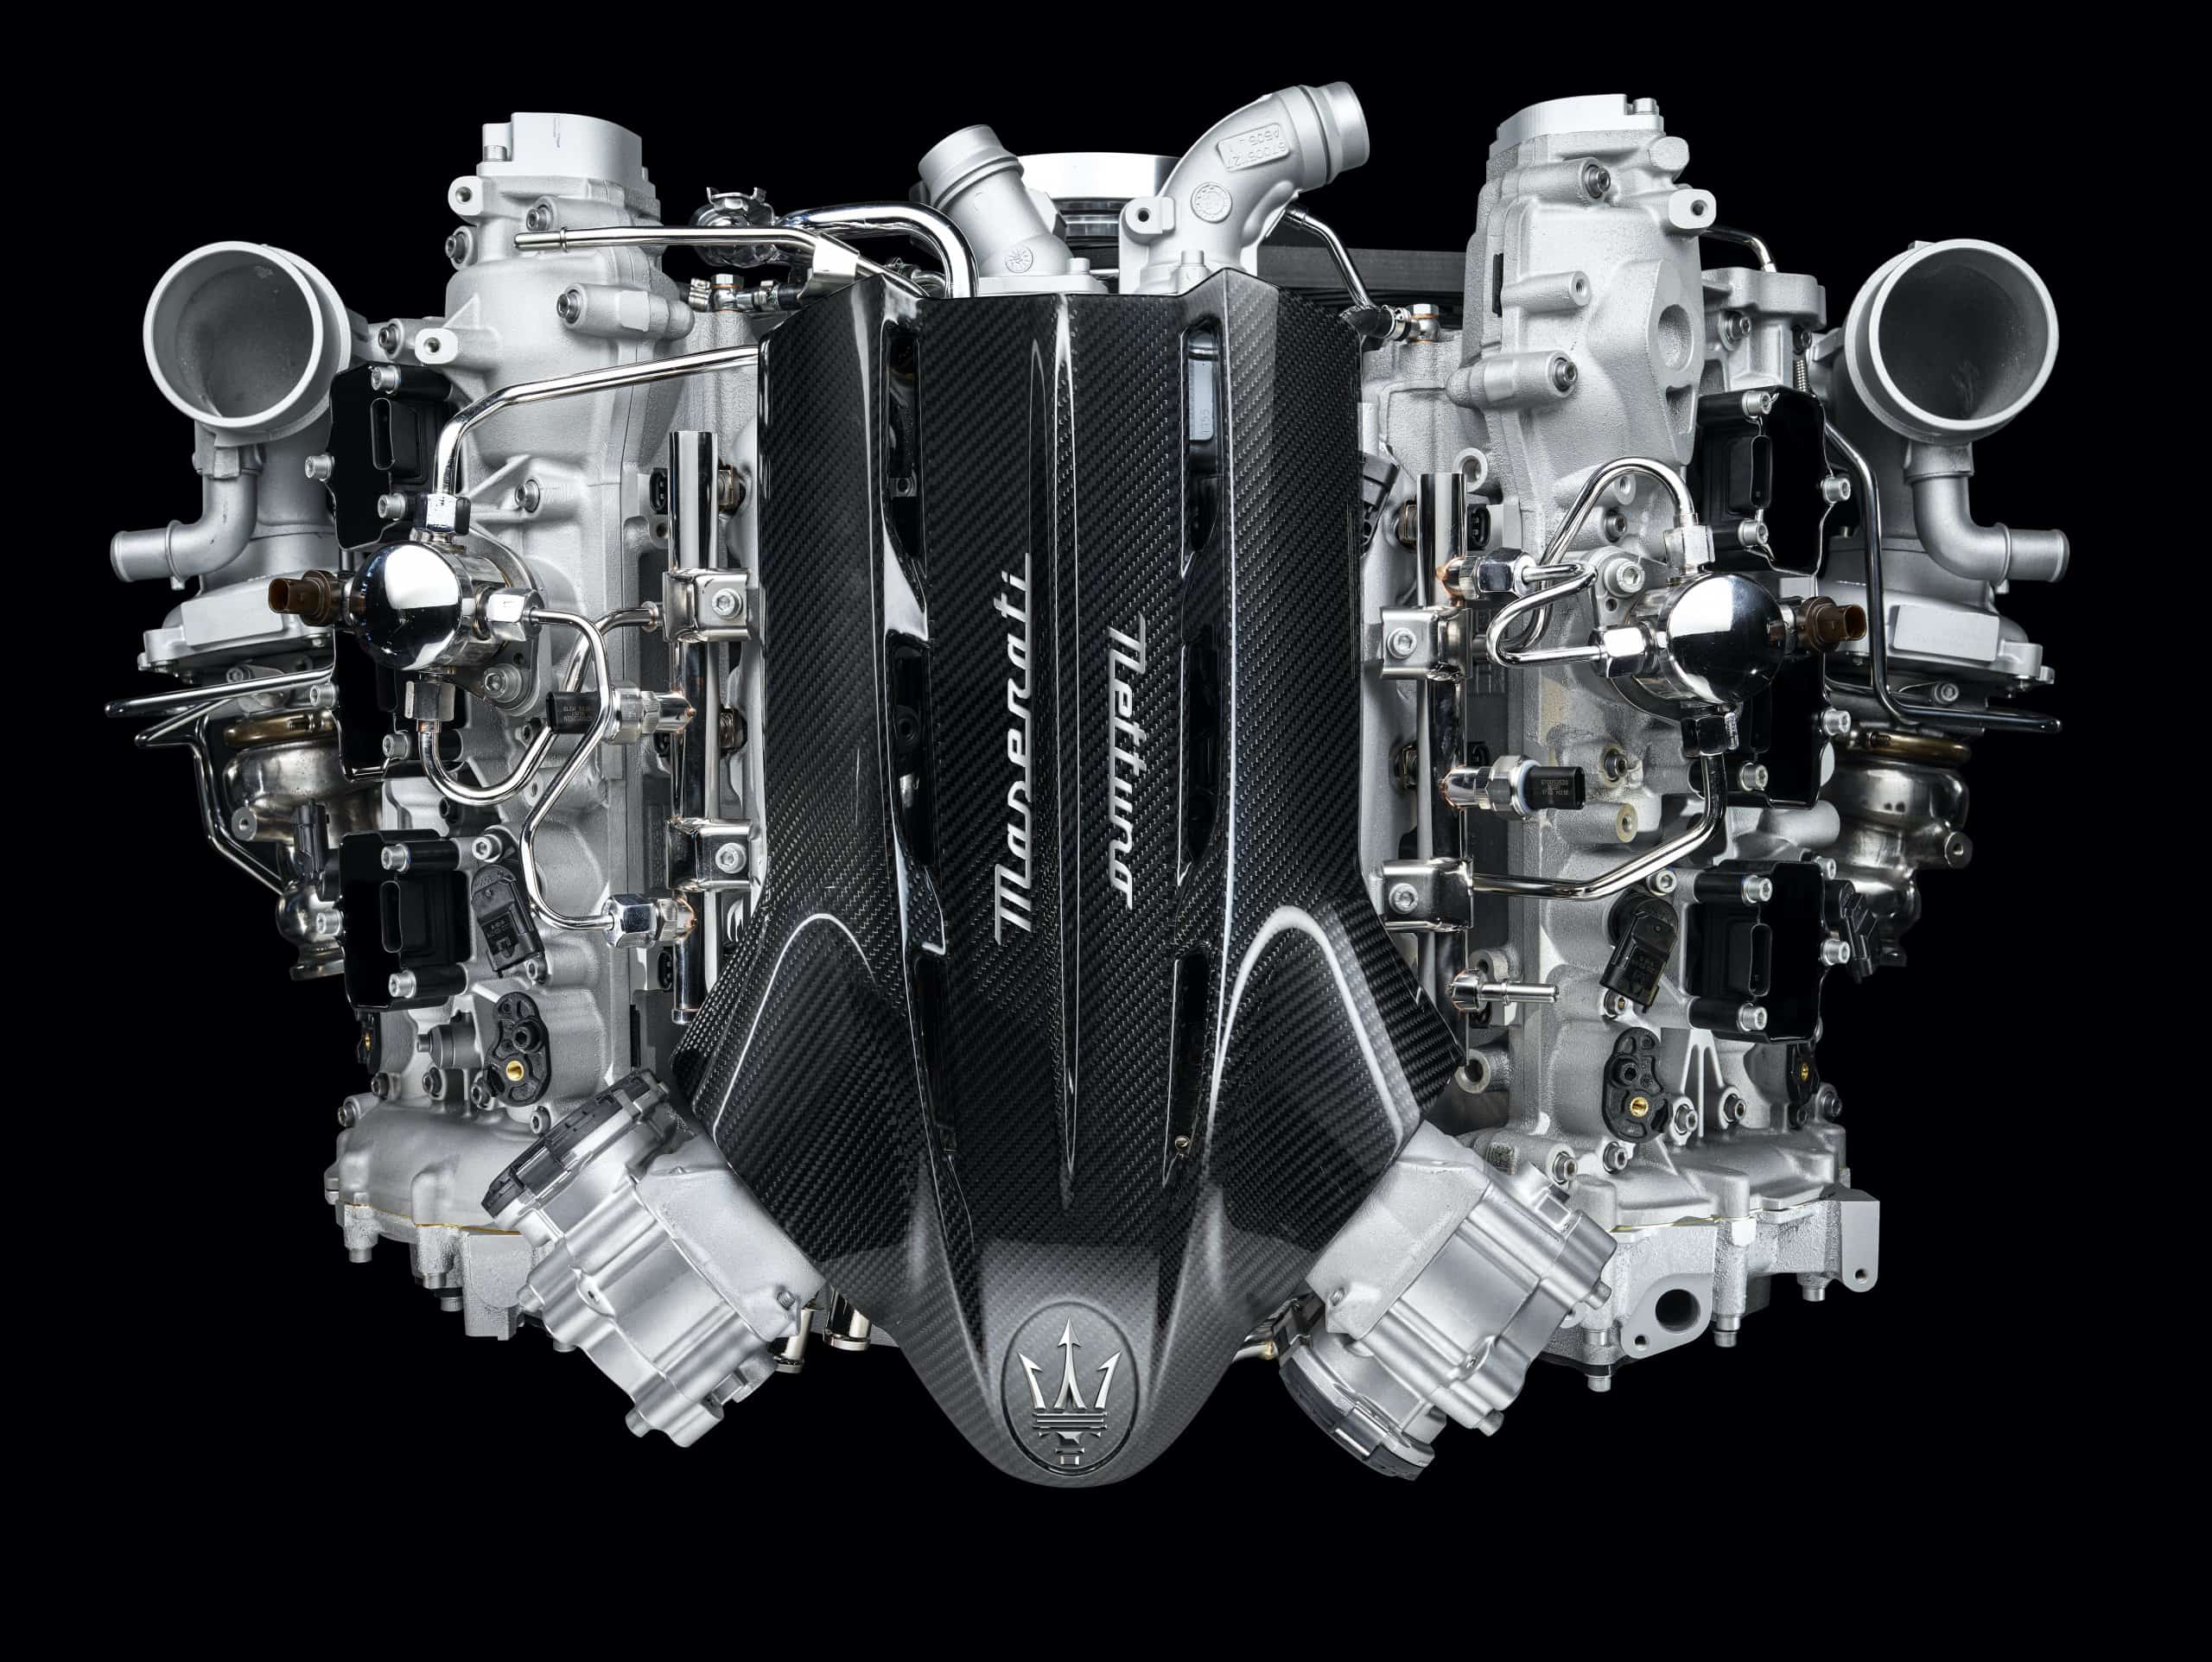 Neptune, Maserati reveals new twin-turbo V6 with F1 technology, ClassicCars.com Journal